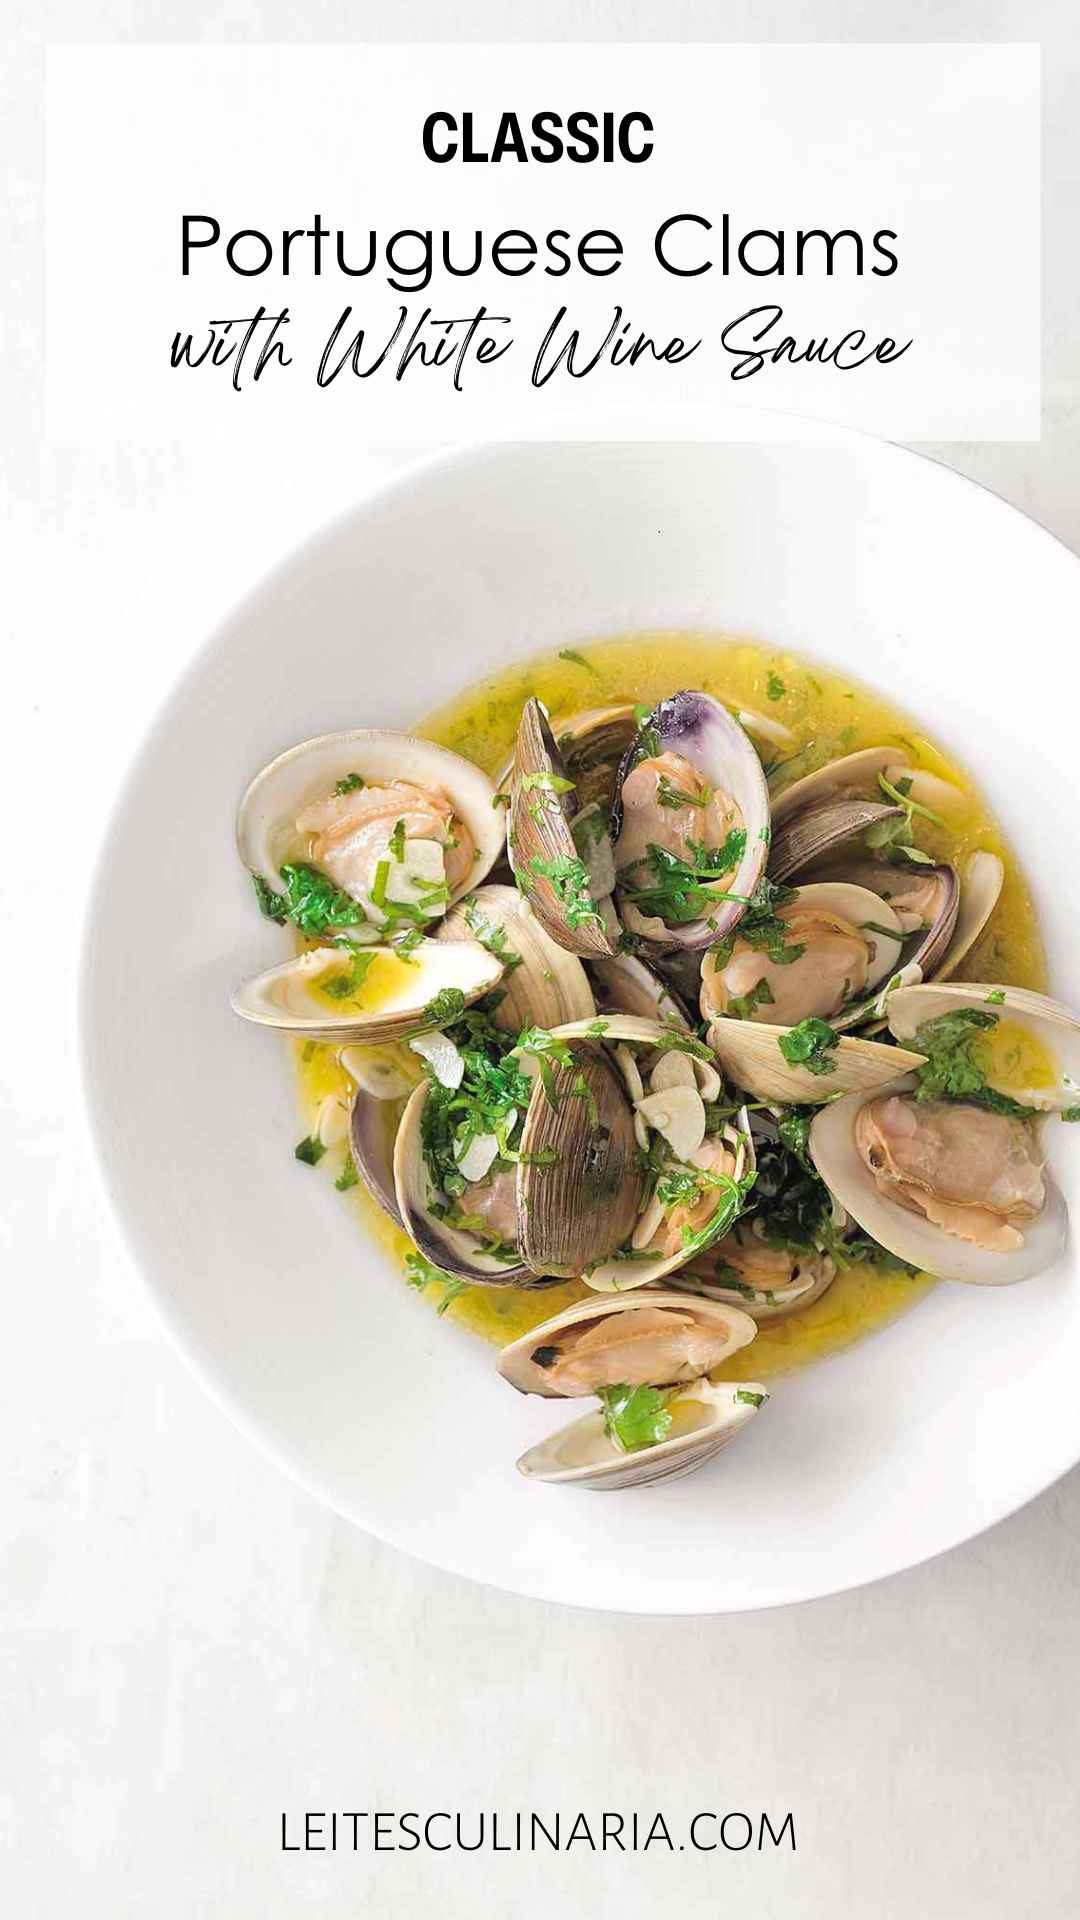 A white bowl filled with clams in a white wine, garlic, and cilantro sauce.